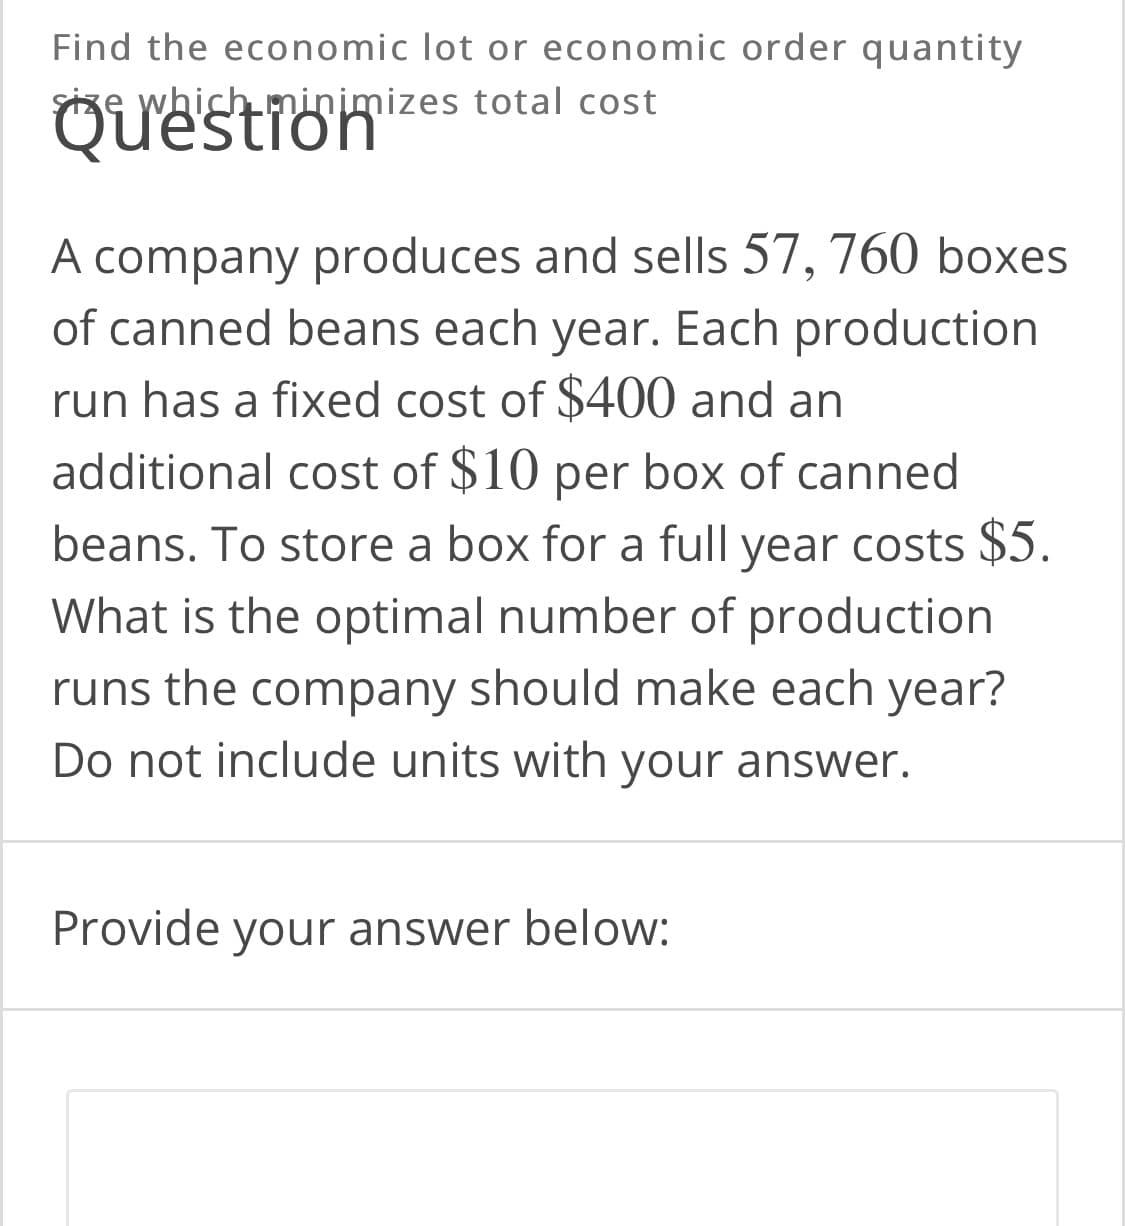 Find the economic lot or economic order quantity
Size which minimizes total cost
Question
A company produces and sells 57, 760 boxes
of canned beans each year. Each production
run has a fixed cost of $400 and an
additional cost of $10 per box of canned
beans. To store a box for a full year costs $5.
What is the optimal number of production
runs the company should make each year?
Do not include units with your answer.
Provide your answer below:
